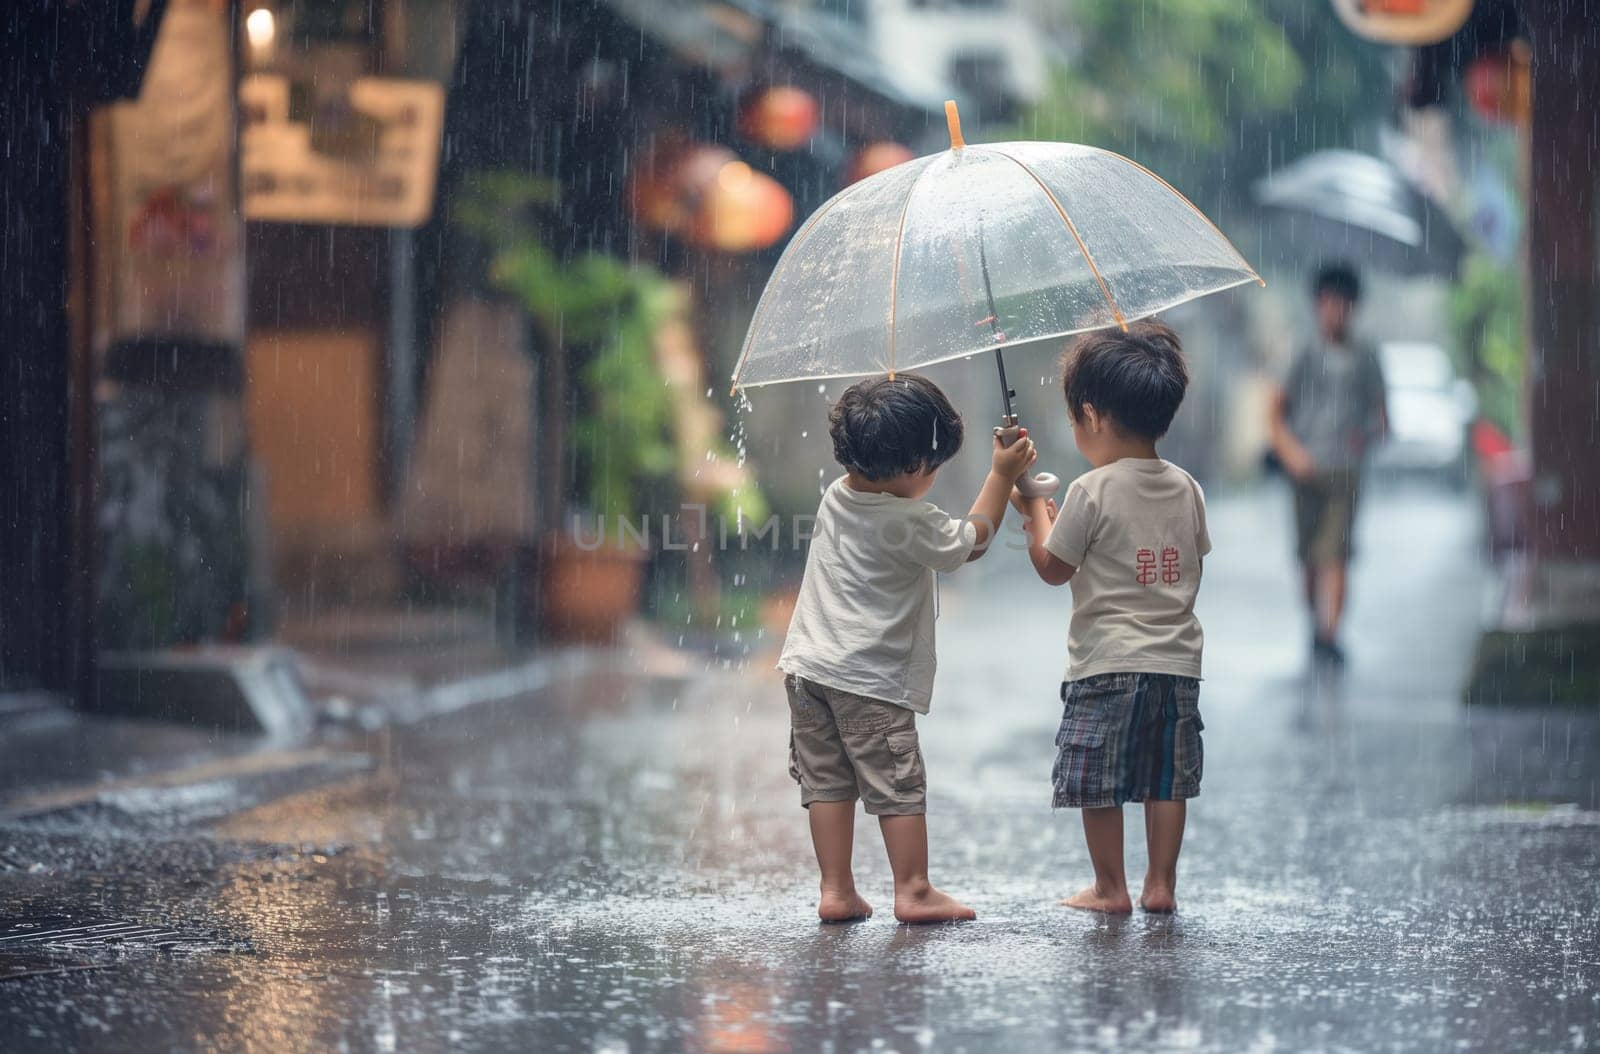 Two small children in shorts stand on a wet street under a transparent umbrella, the rain is noticeably pouring around them, barefoot on the sidewalk, with traditional Chinese characters on their shirts